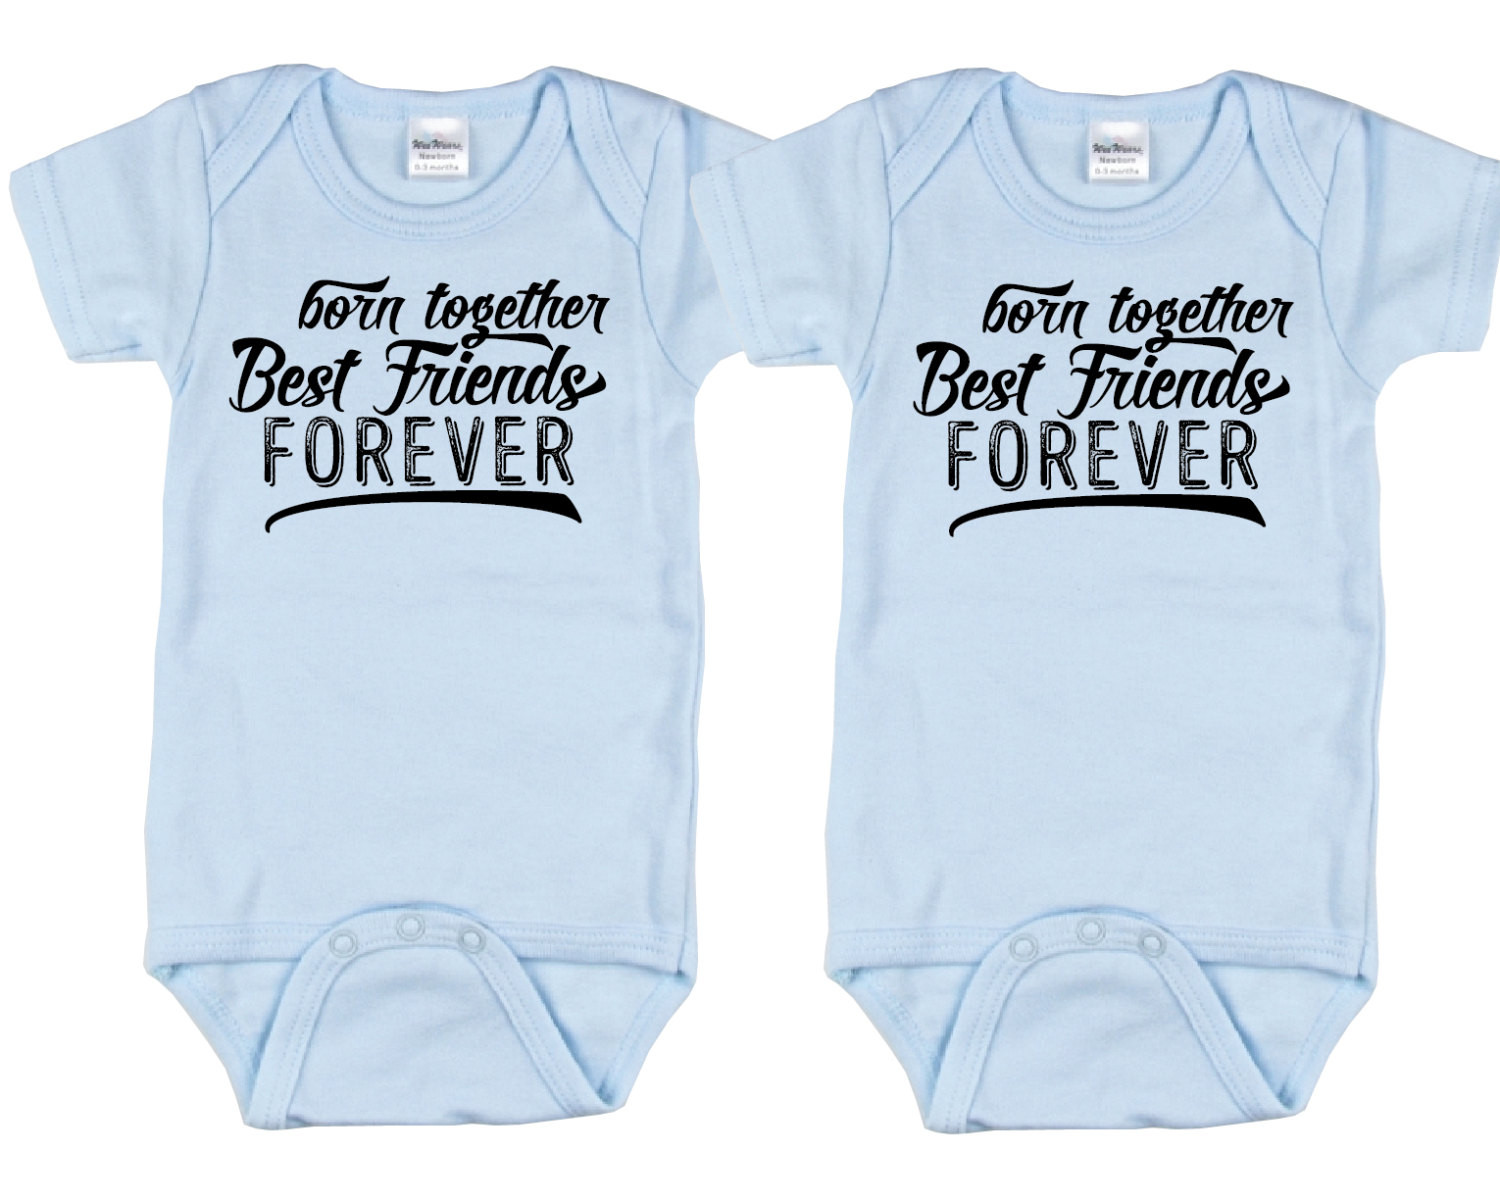 Baby Twin Gift Ideas
 Cute Baby t for twin boys Born To her Best Friends